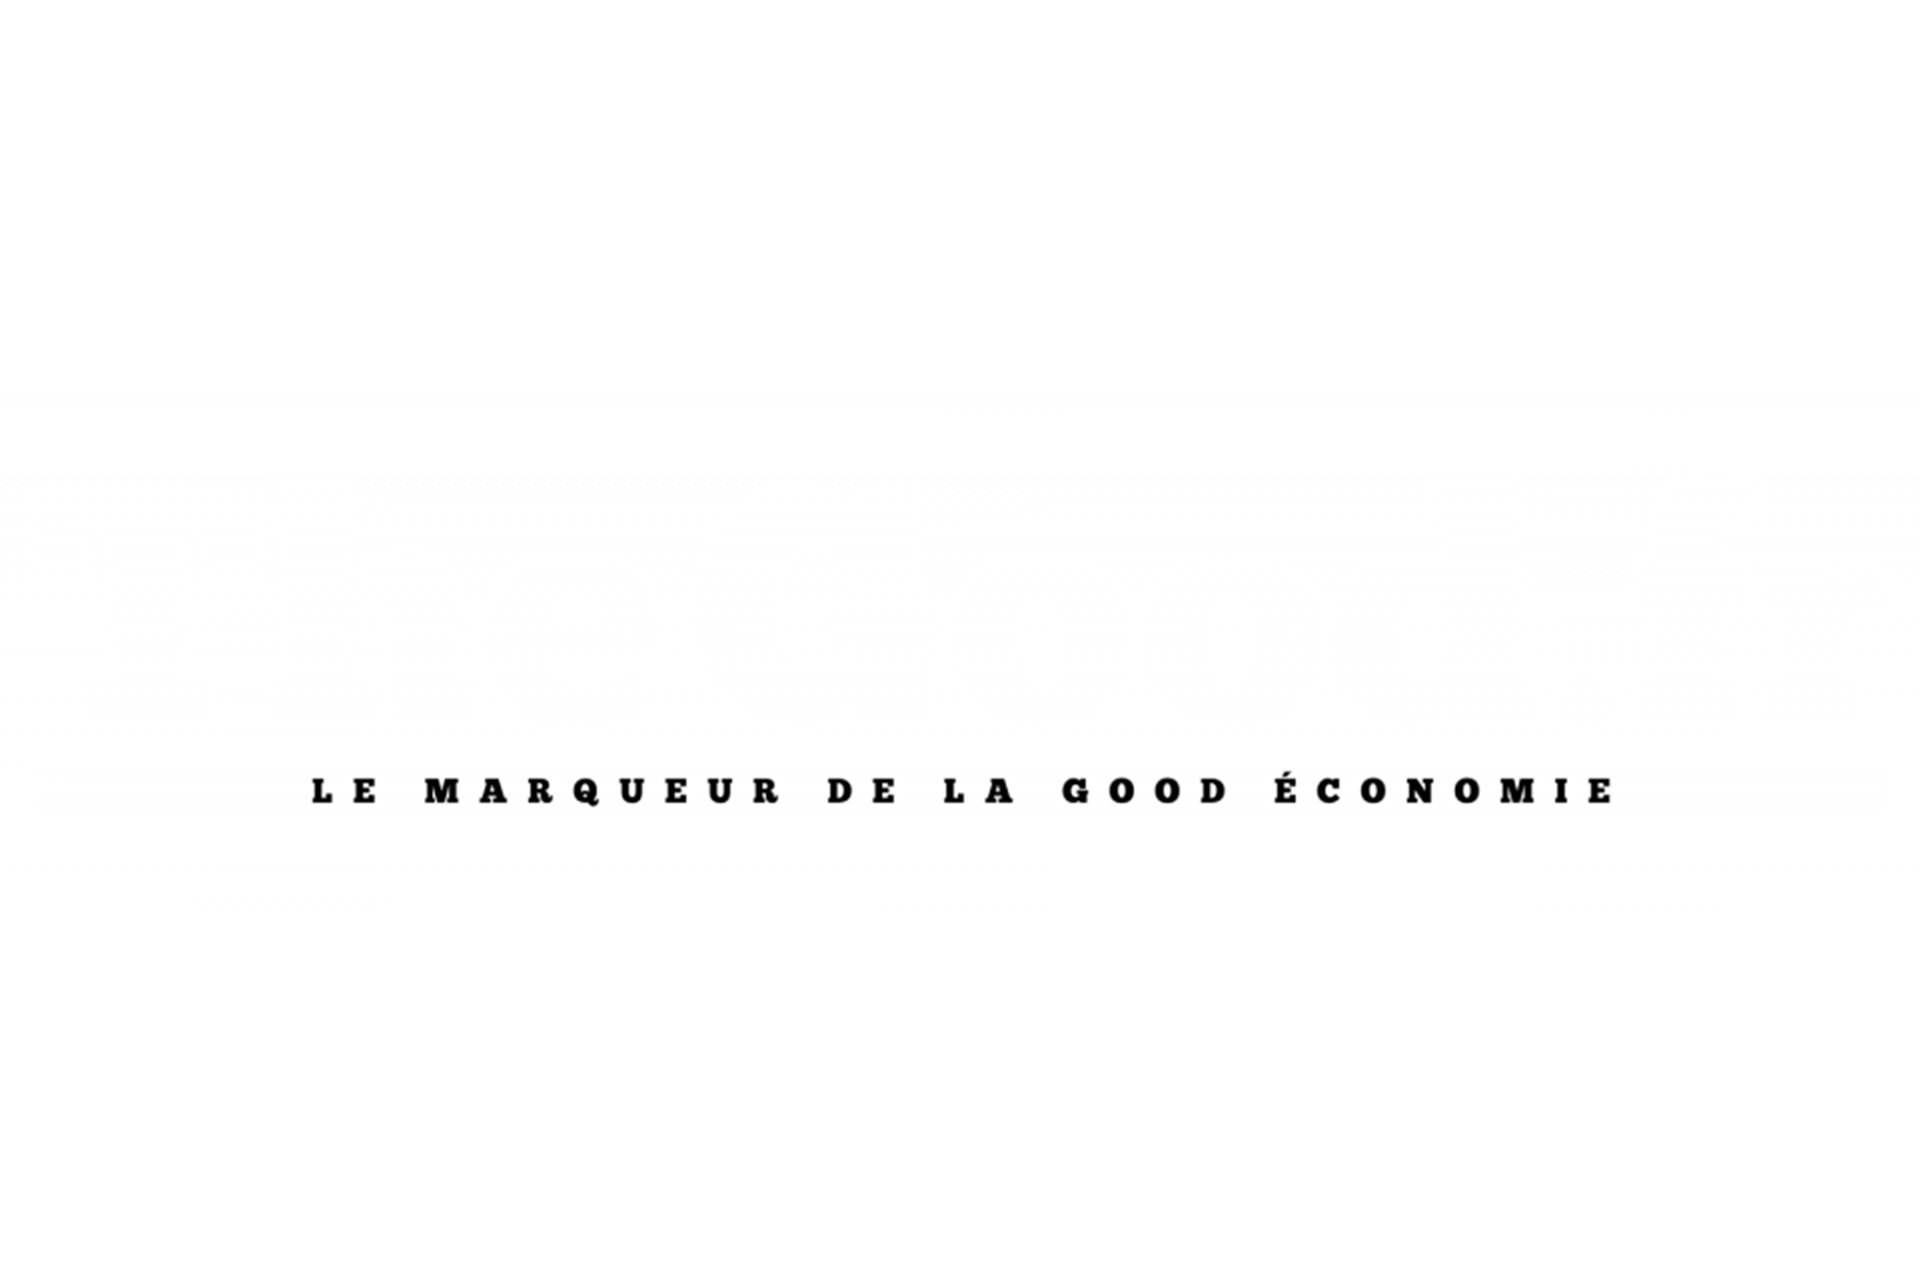 https://www.thegood.fr/wp-content/uploads/2021/05/the-good.png